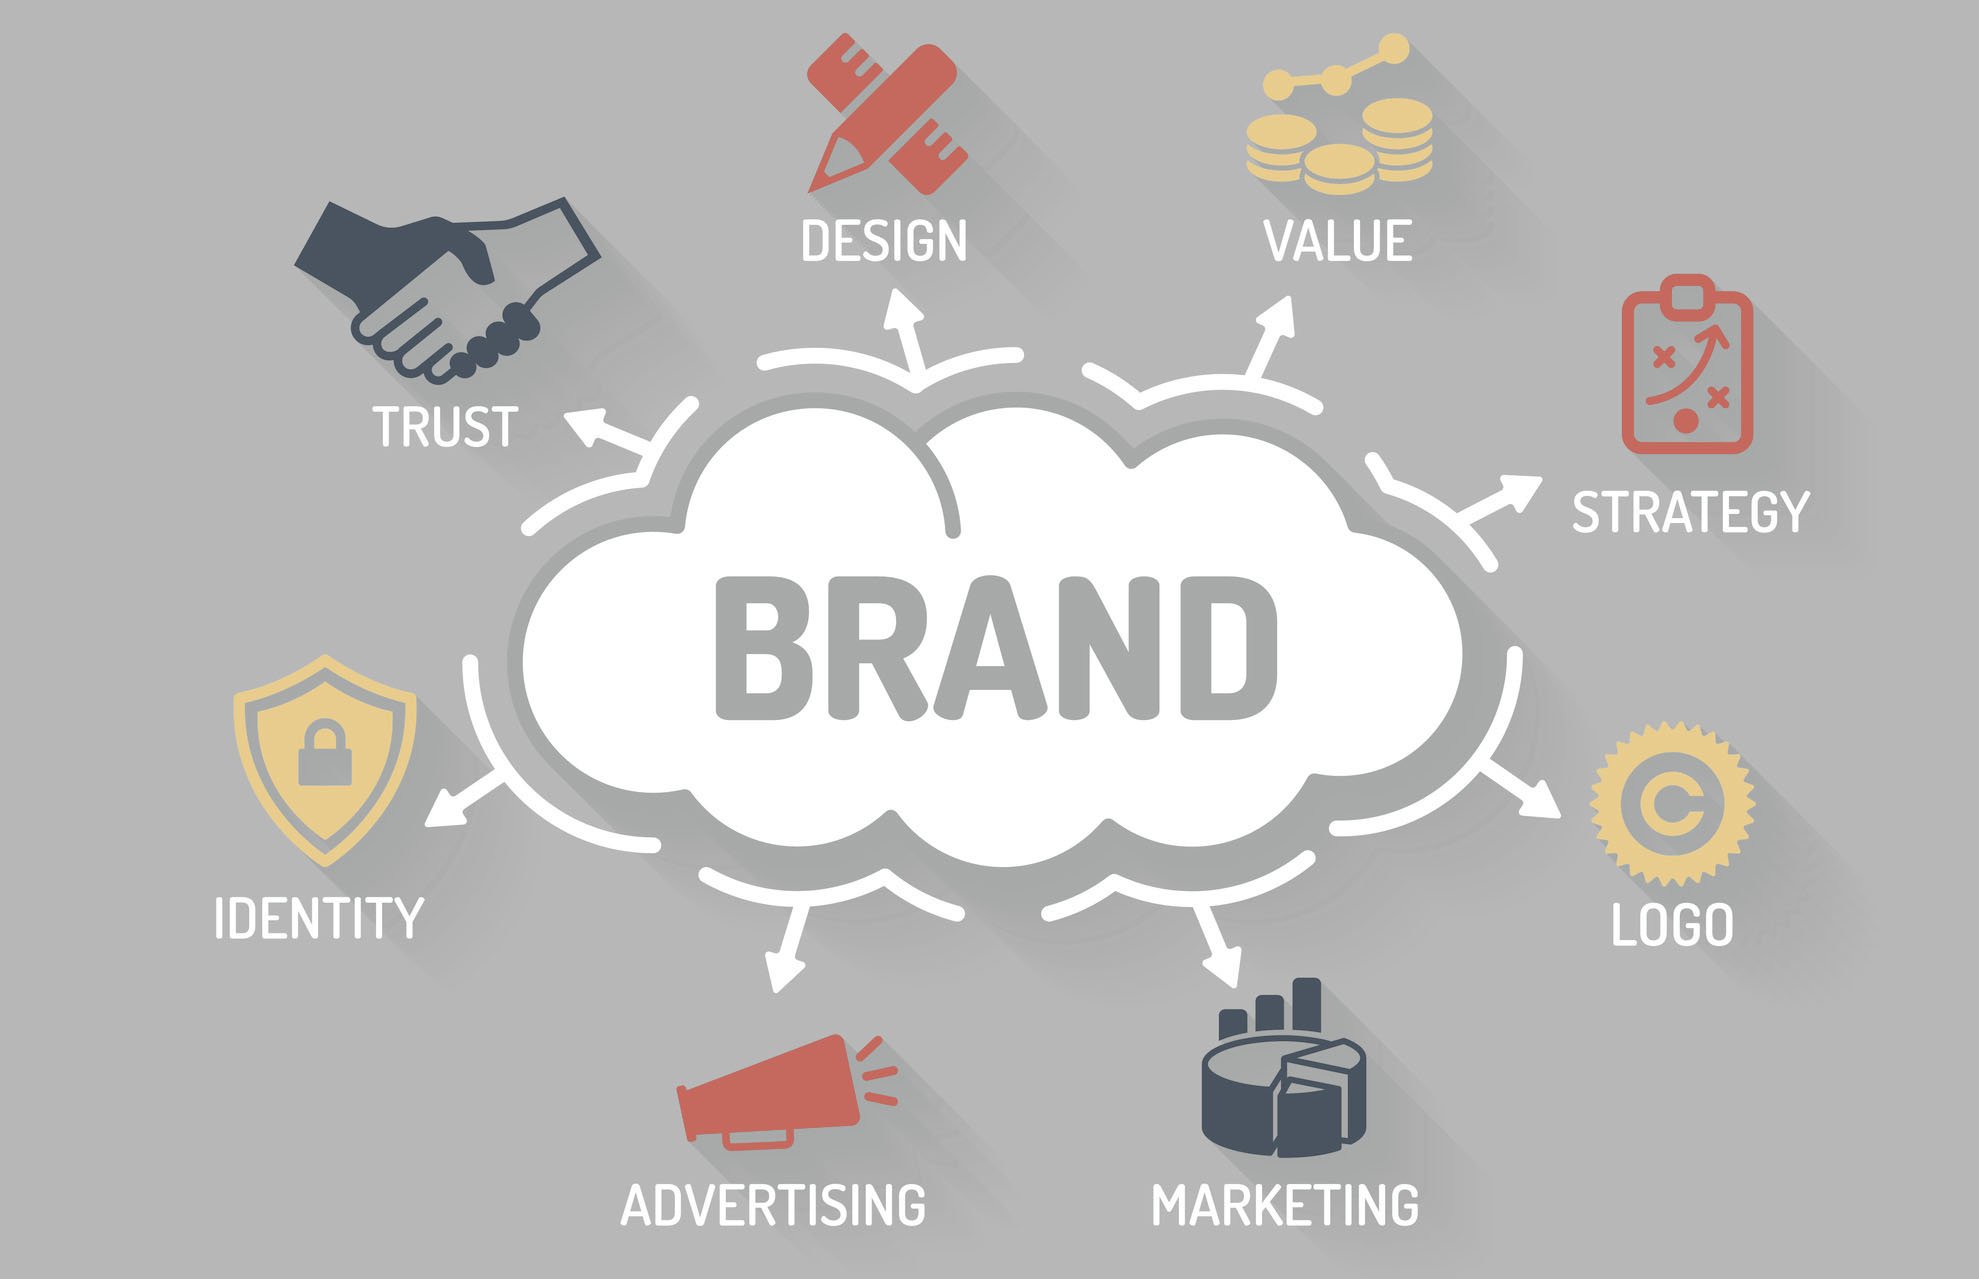 Why Is Logo Important For Your Brand